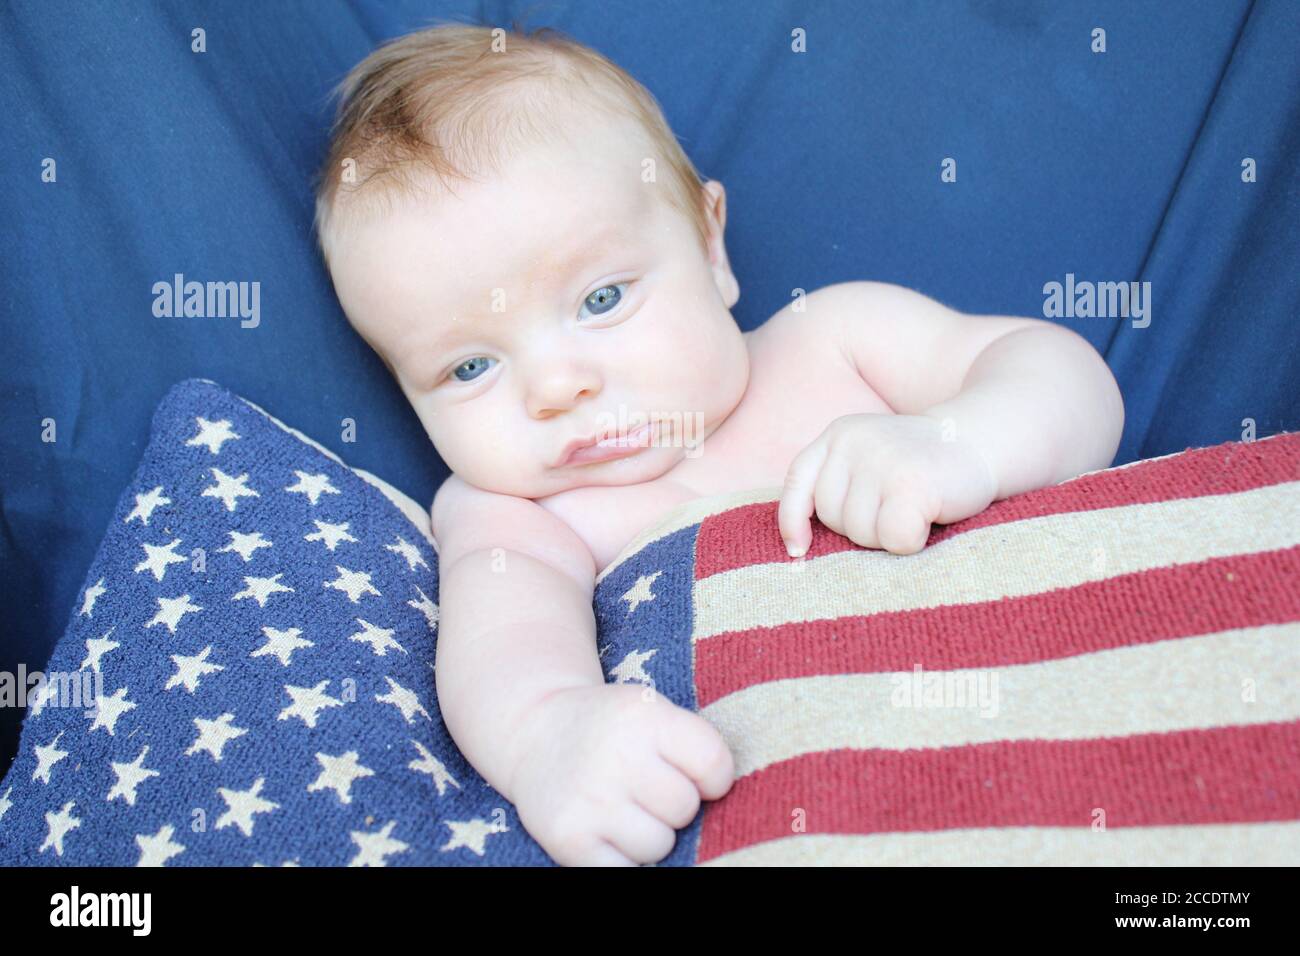 A proud American baby with natural matching colors of the United States of America: Red, White, and Blue. Stock Photo